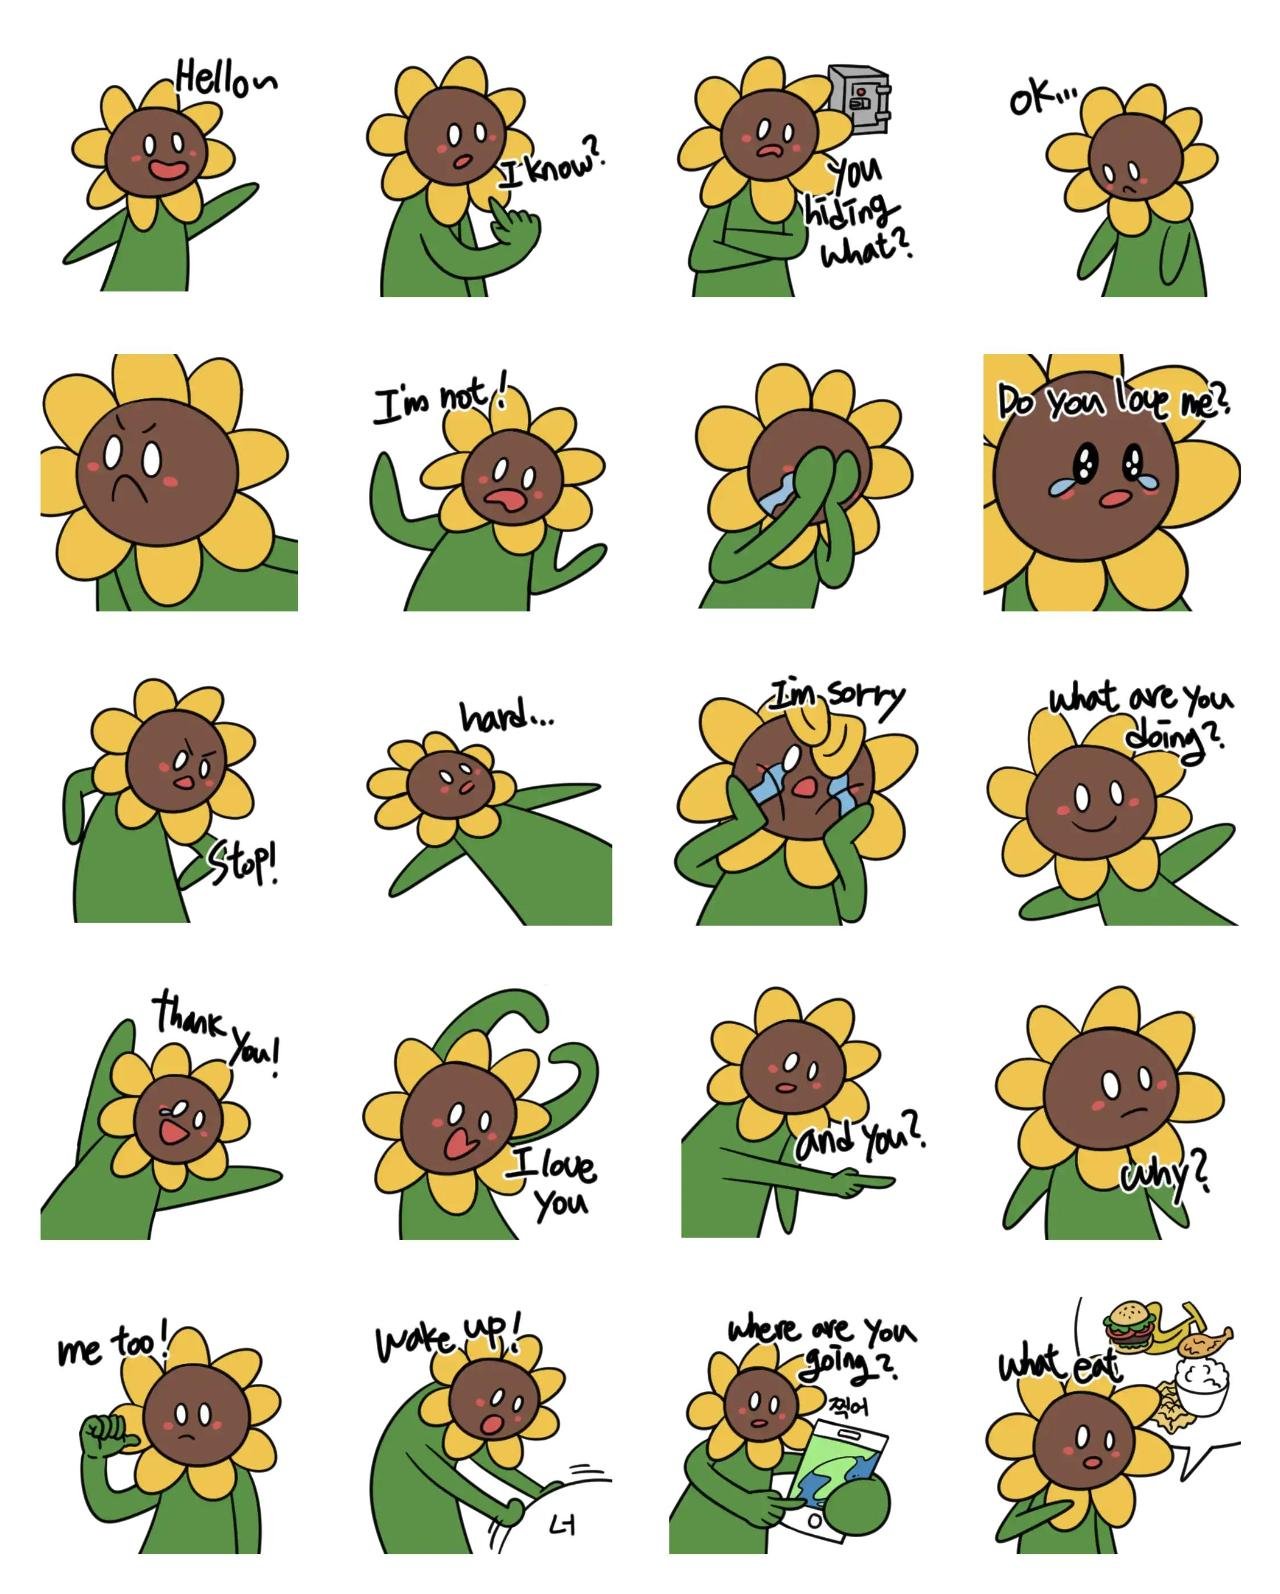 Sunflowers that want you Animation/Cartoon,Etc. sticker pack for Whatsapp, Telegram, Signal, and others chatting and message apps